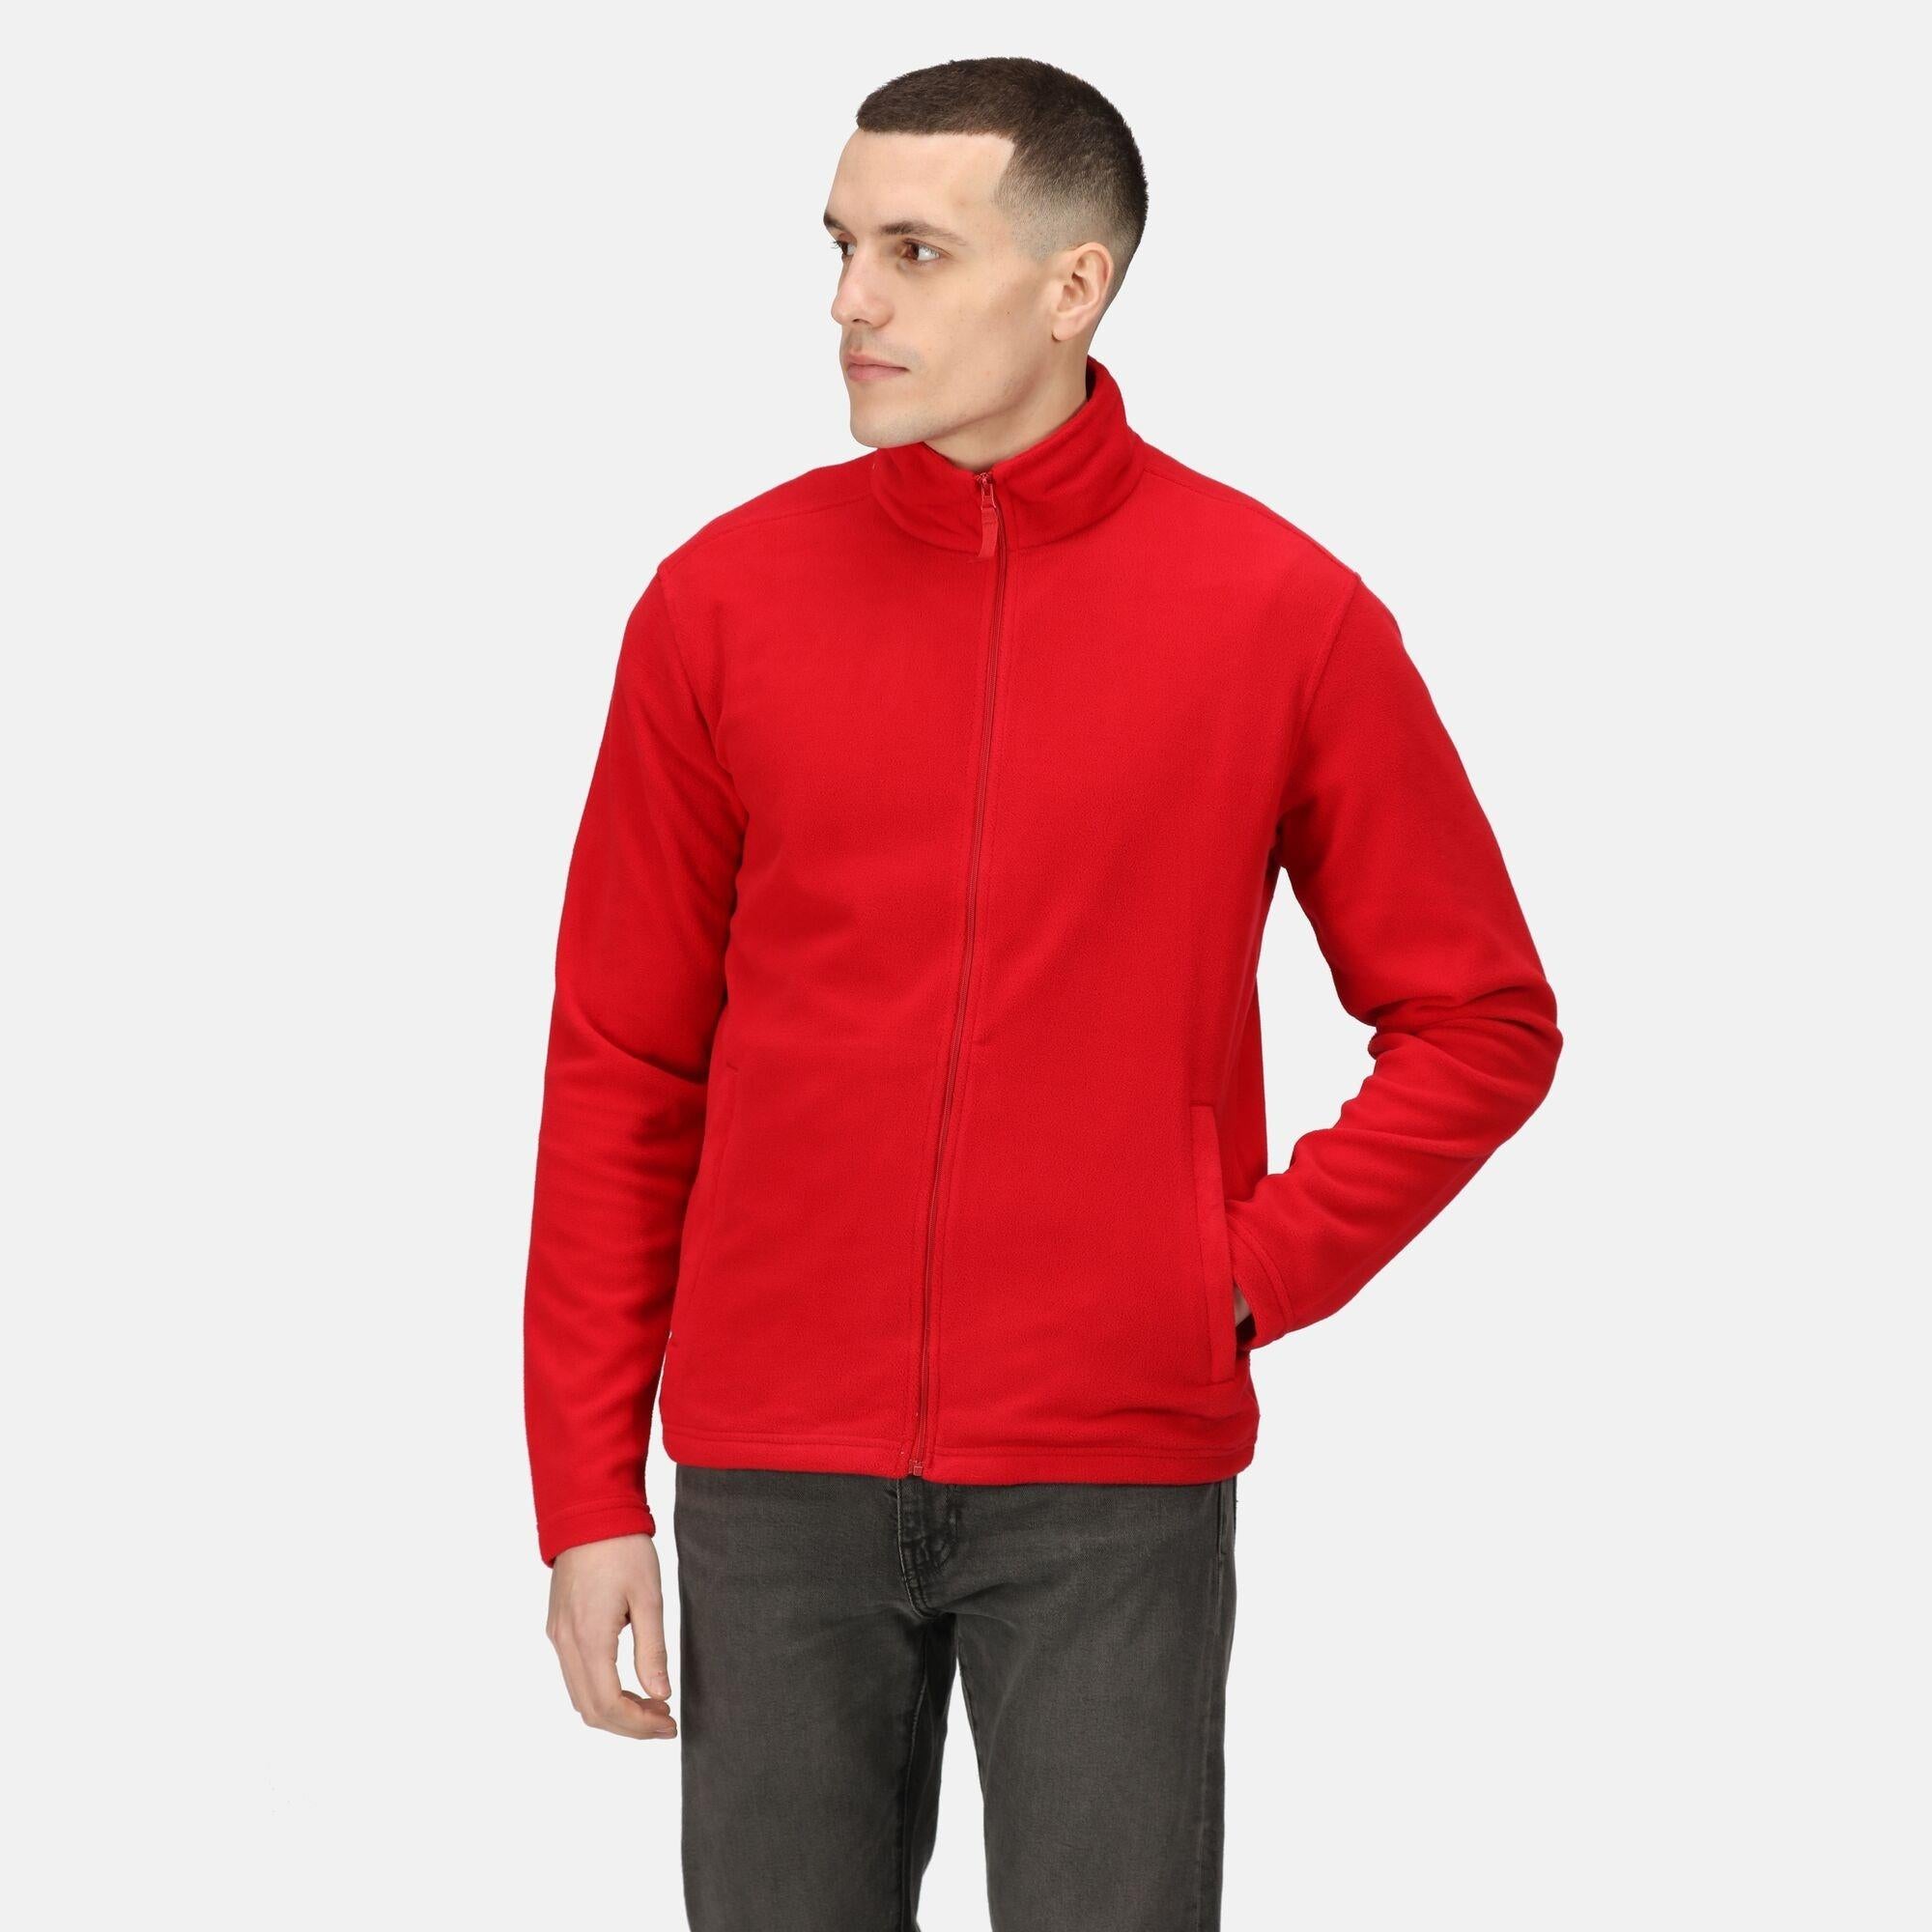 Regatta Classic classic red men's lightweight and easy care microfleece #TRF619